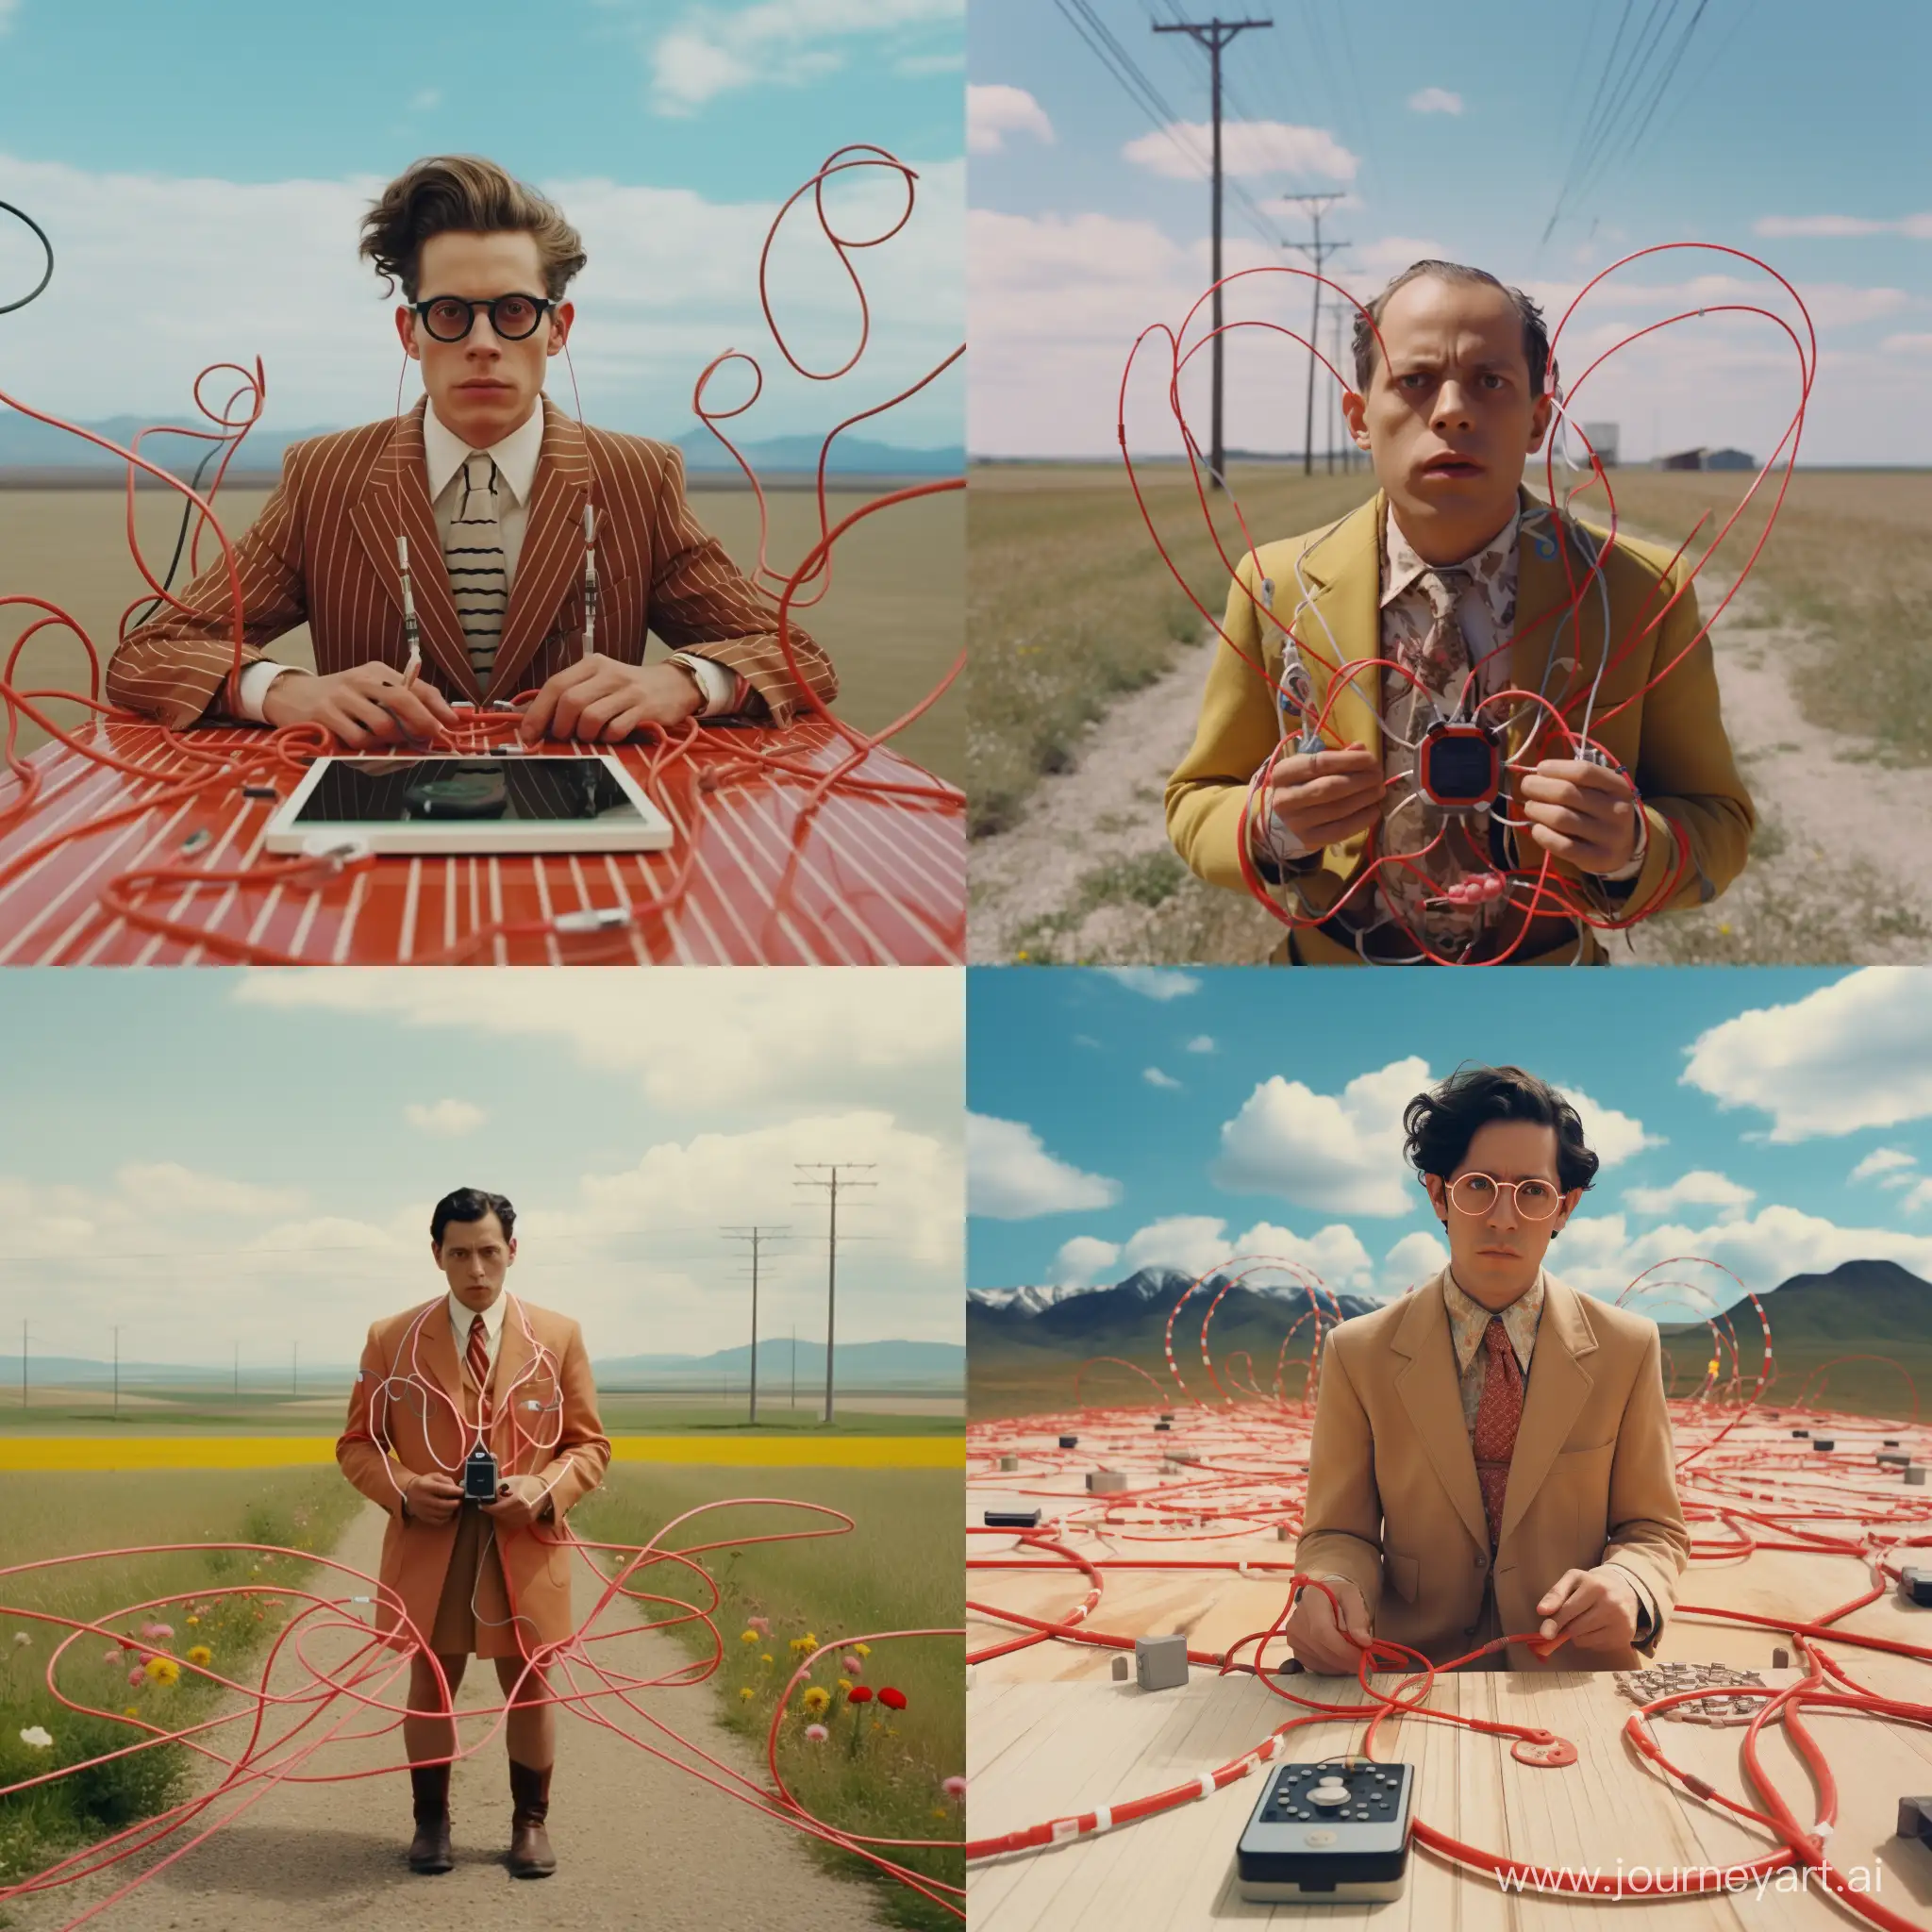 Wired-Connection-to-HeartShaped-Smartphone-in-Cinematic-Wes-Anderson-Style